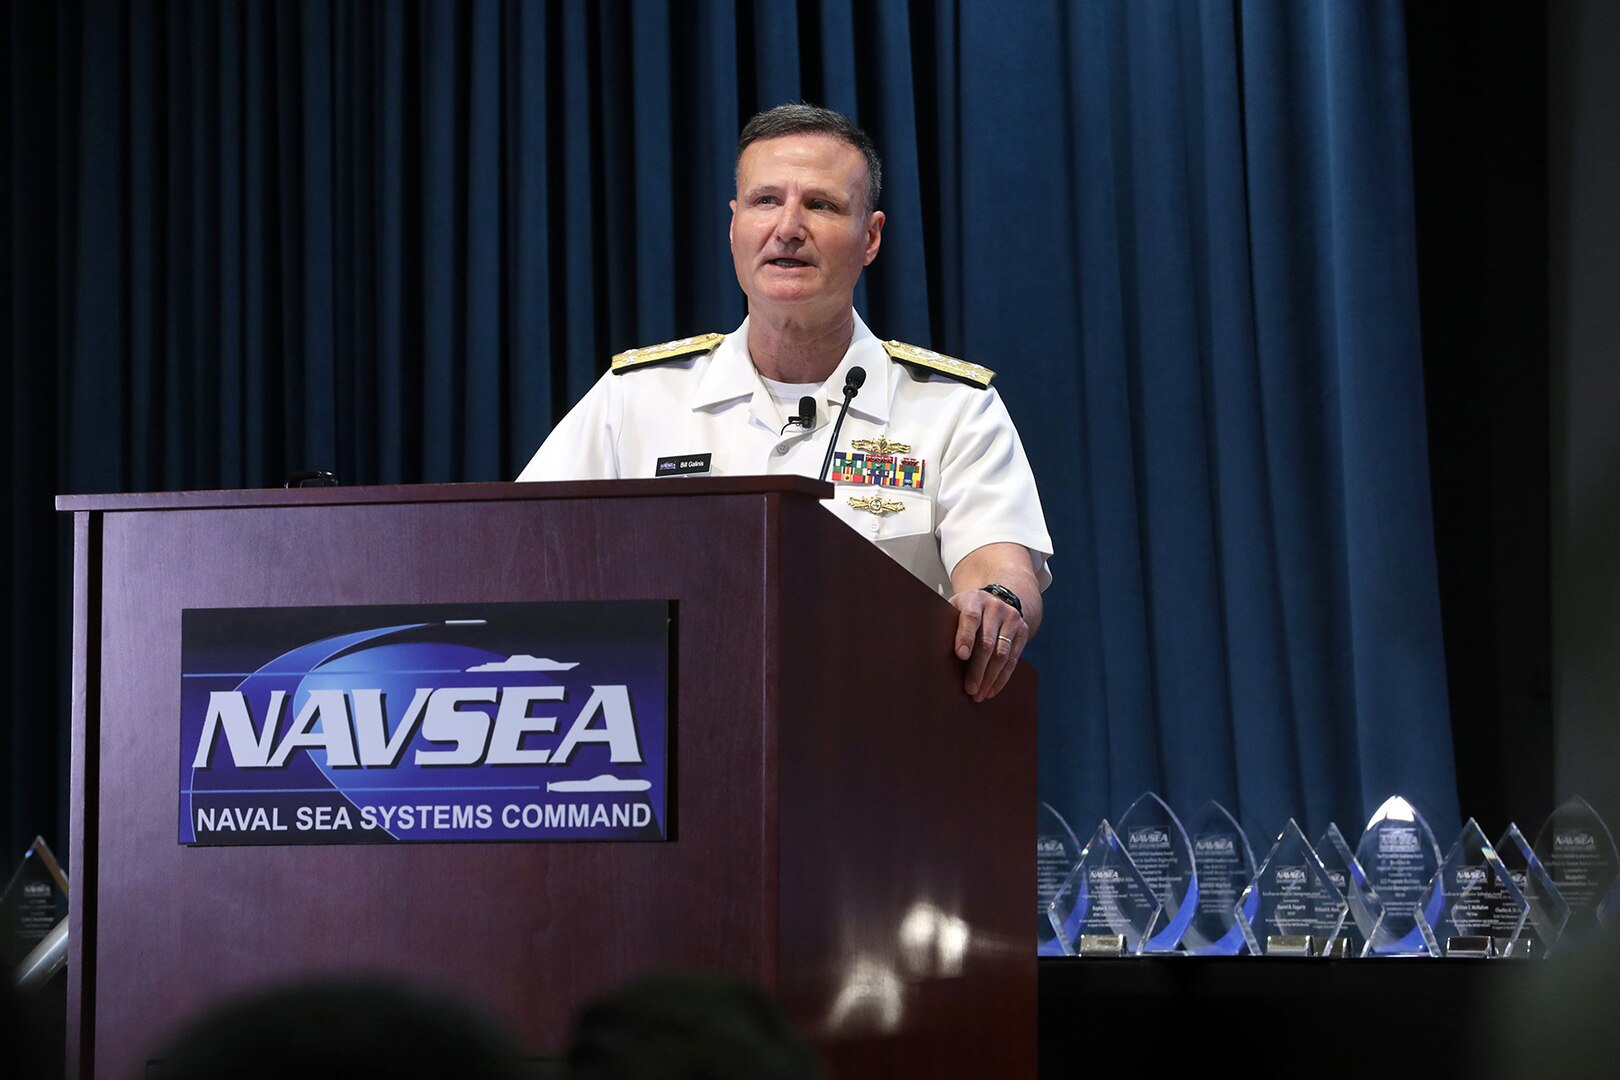 Washington, DC (May 4, 2023) - - NAVSEA FY22 Excellence Awards Ceremony hosted by Vice Admiral Bill Galinis, Commander, Naval Sea Systems Command (NAVSEA) and held in the Humphreys Auditorium at the Washington Navy Yard.